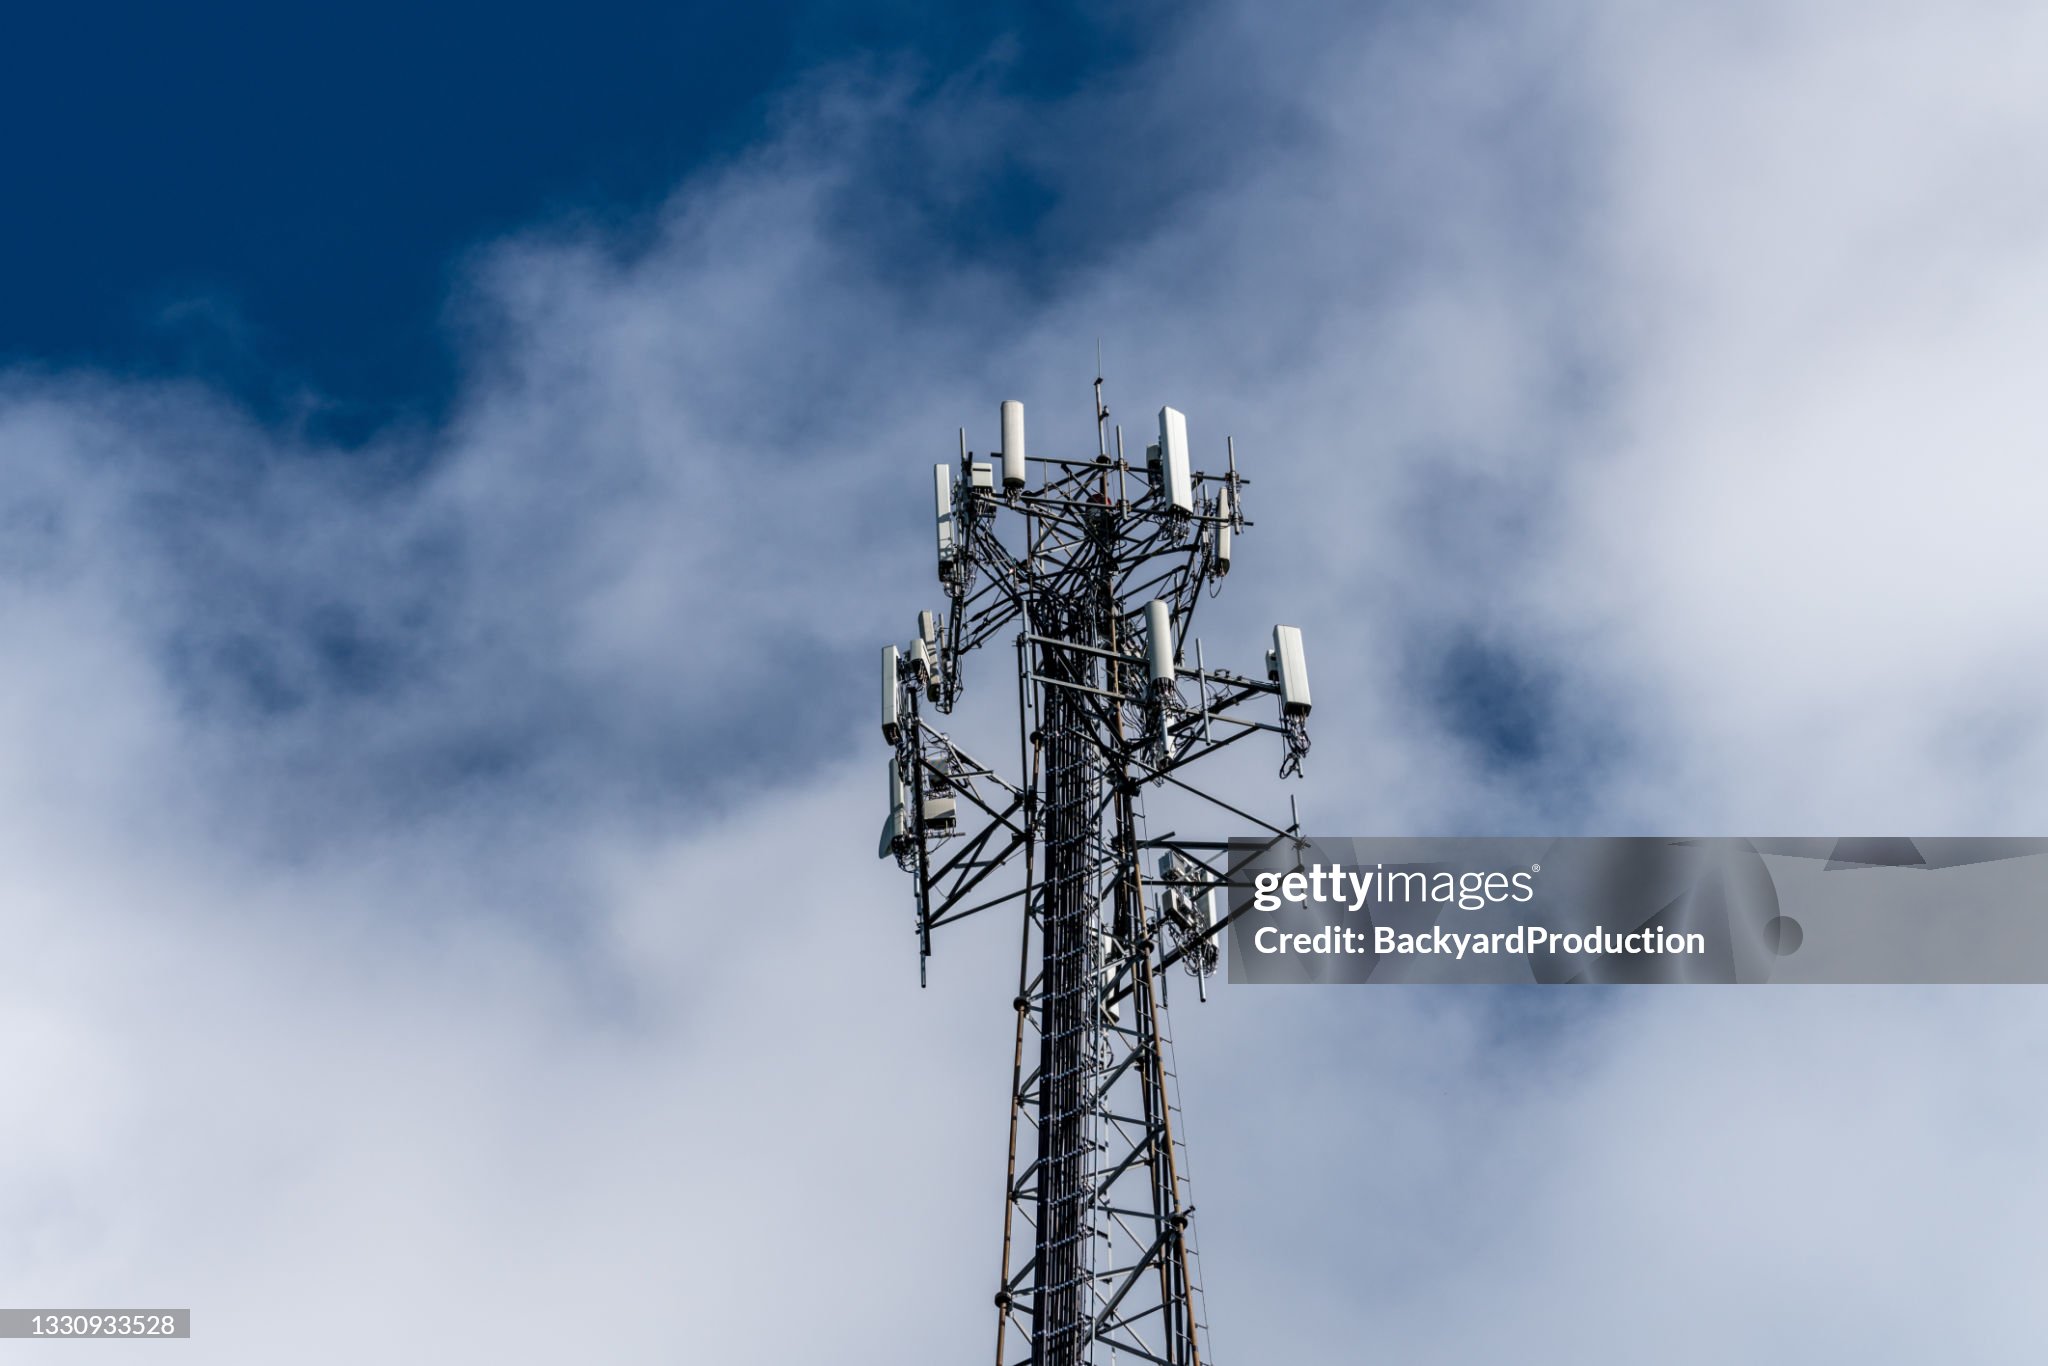 Stock photo of cell phone or wireless aerial tower surrounded by clouds